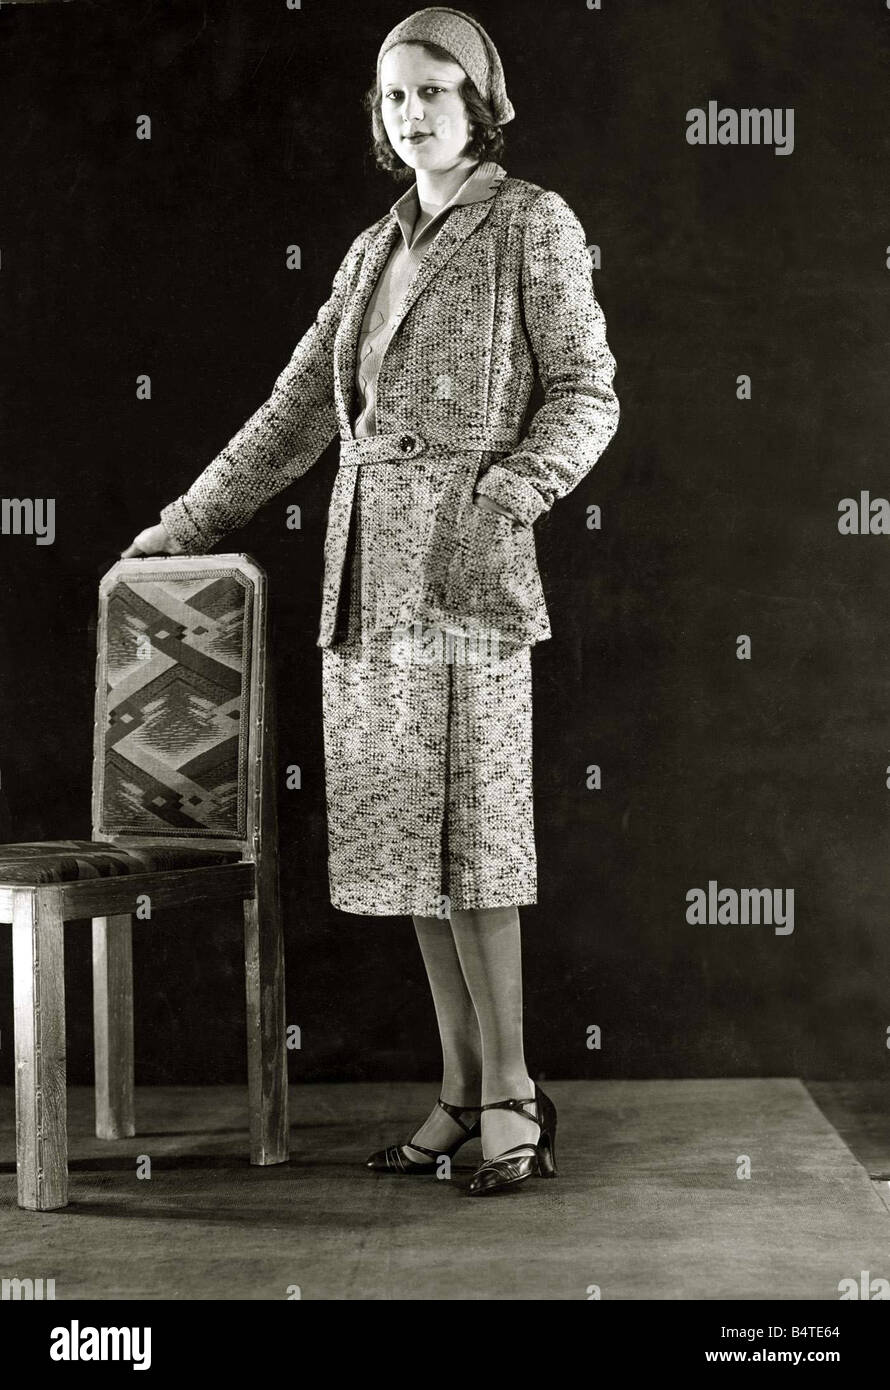 Black and Yellow flecked tweed sports suit March 1931 The jumper is of yellow stockinette The suit is worn with a chenile cap to match Mirrorpix Stock Photo